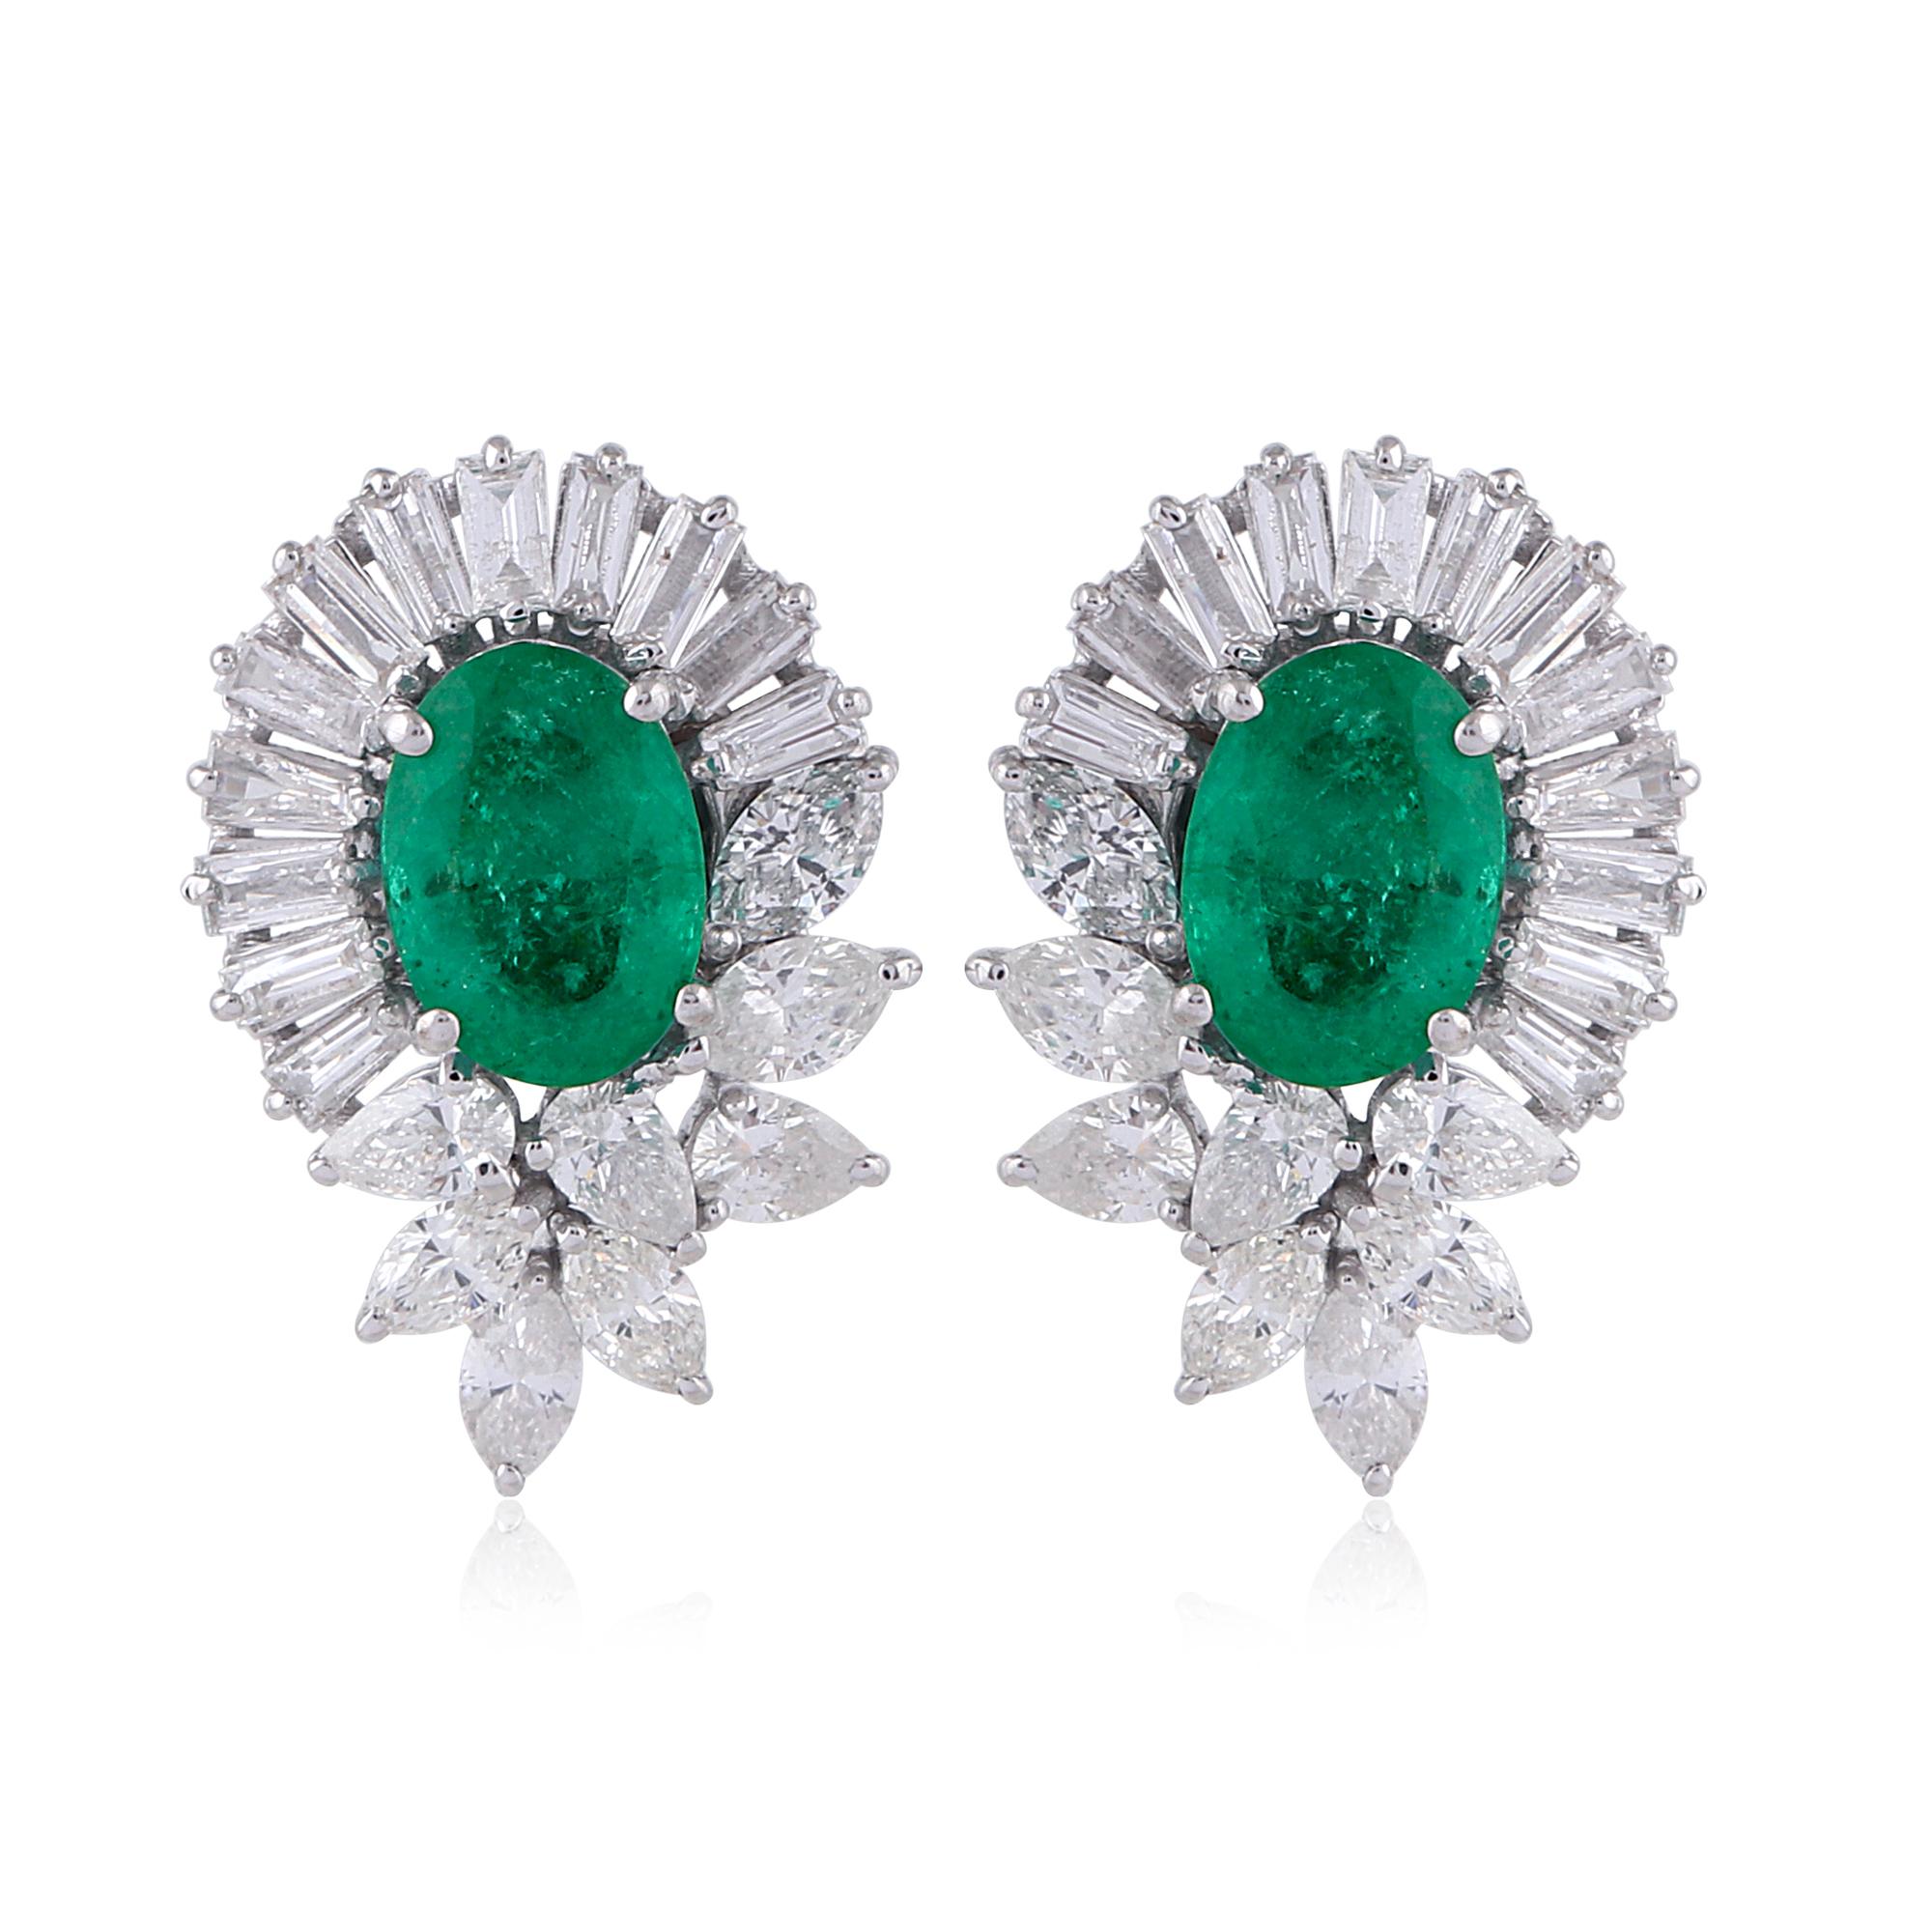 Item Code :- SEE-1016
Gross Wet :- 4.39 gm
18k Gold Wet :- 3.80 gm
Diamond Wet :- 1.50 ct ( SI Clarity & HI Color )
Emerald Wet :- 1.44 ct 
Earrings Size :- 17.44x11.70 mm approx.
✦ Sizing
.....................
We can adjust most items to fit your